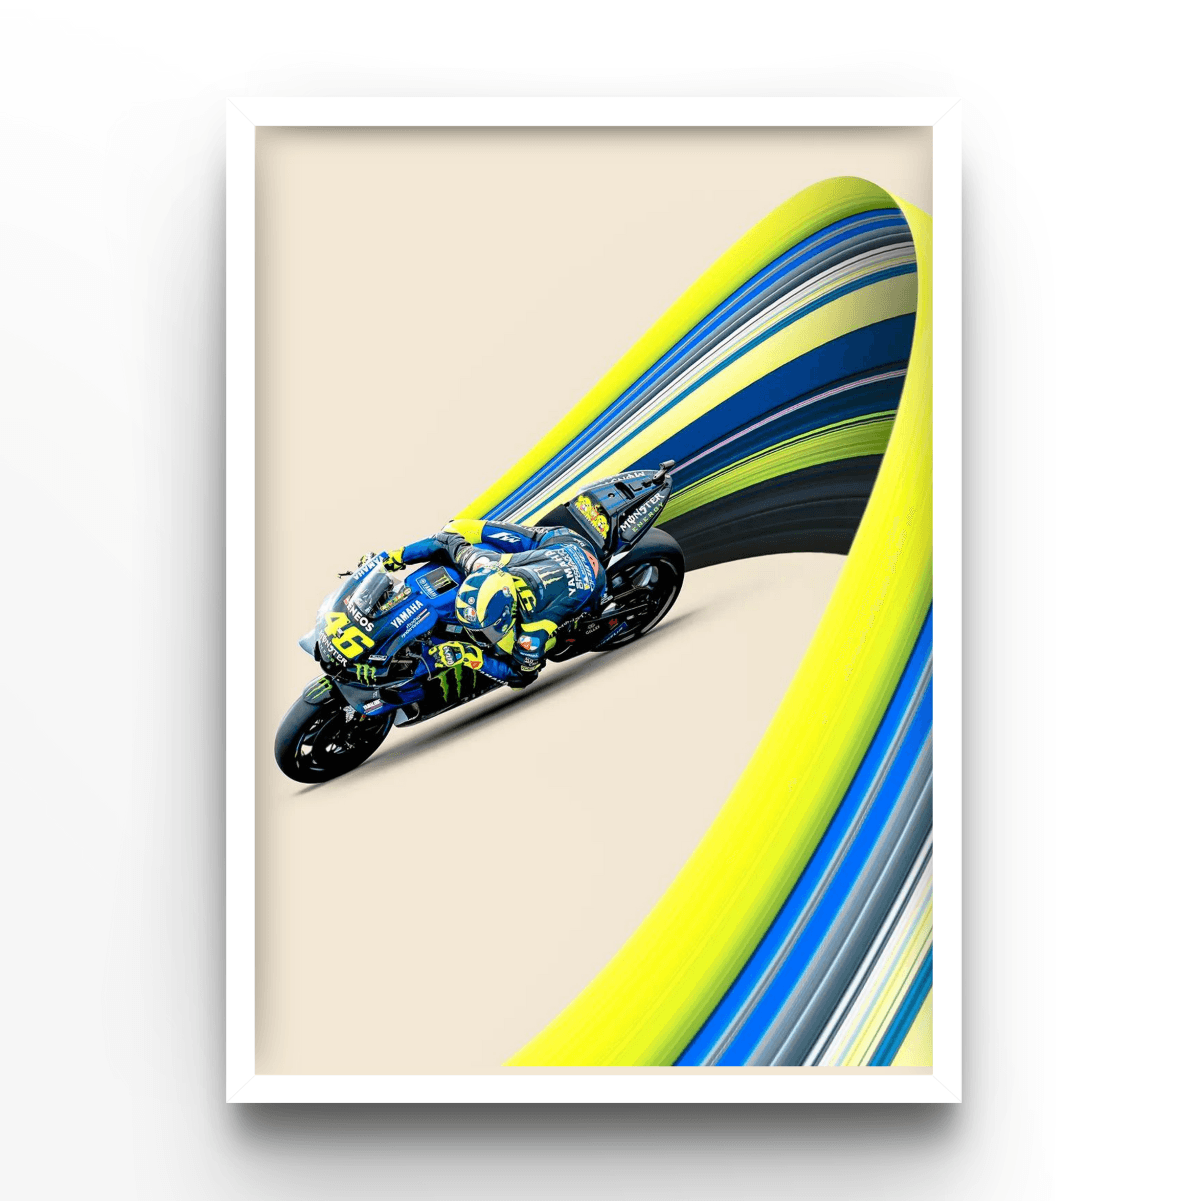 Lines Valentino Rossi - A4, A3, A2 Posters Base - Poster Print Shop / Art Prints / PostersBase